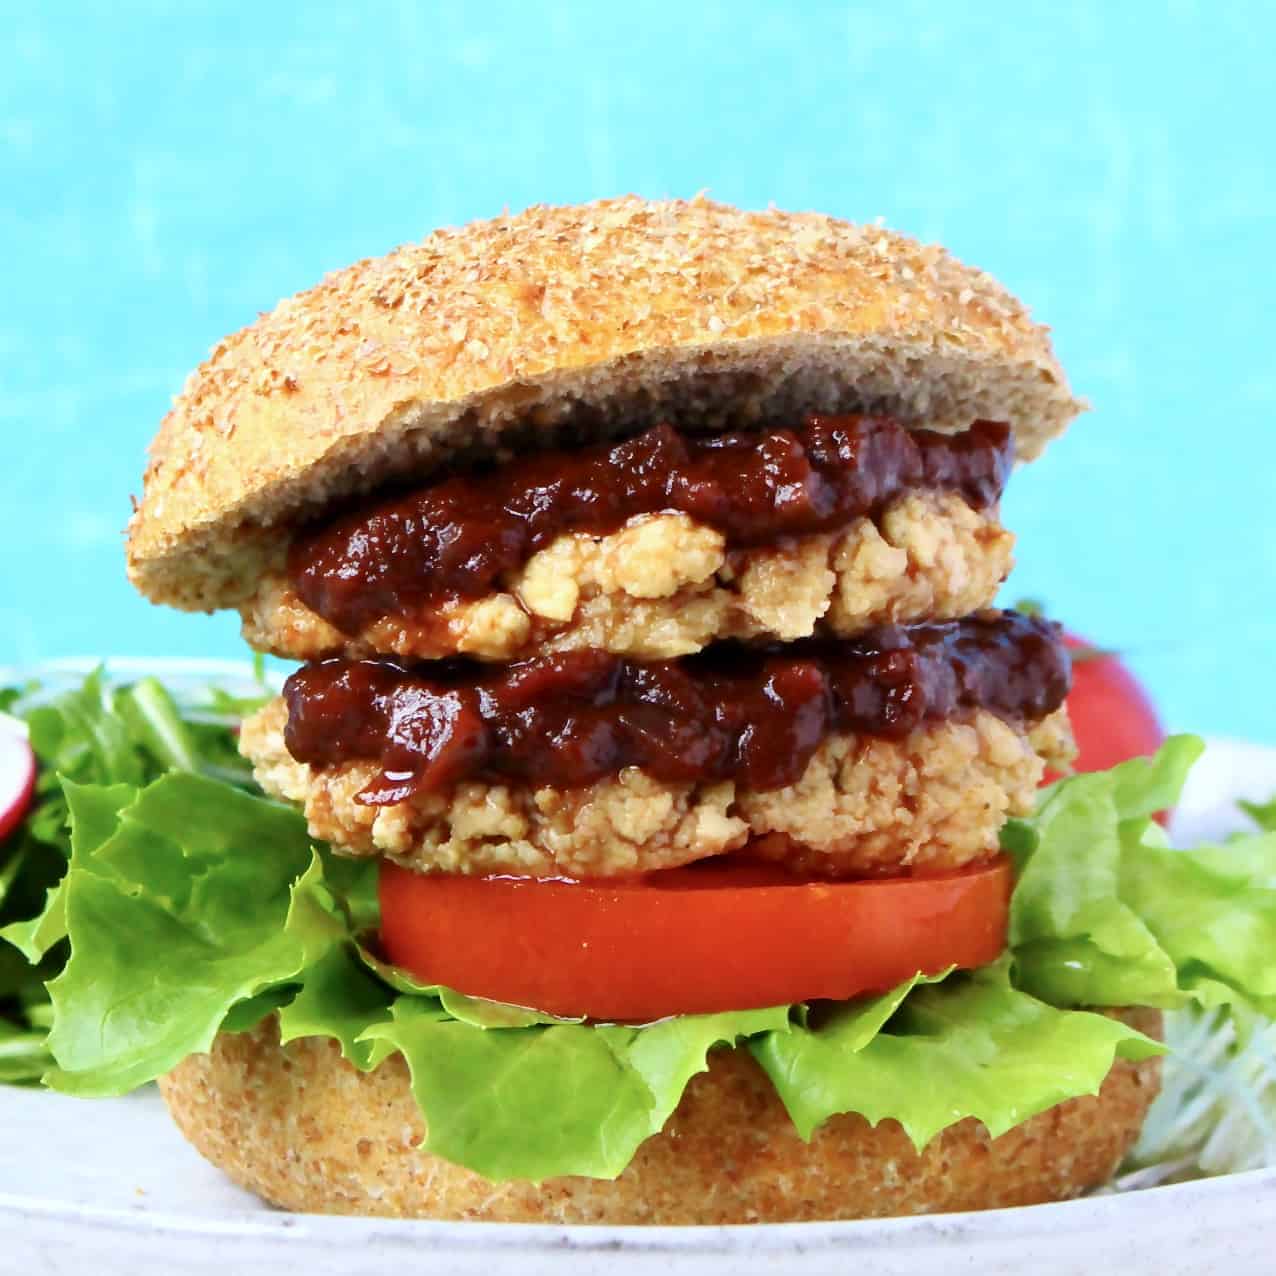 A tofu burger with two patties, brown sauce, lettuce and tomato in a burger bun on a grey plate against a blue background